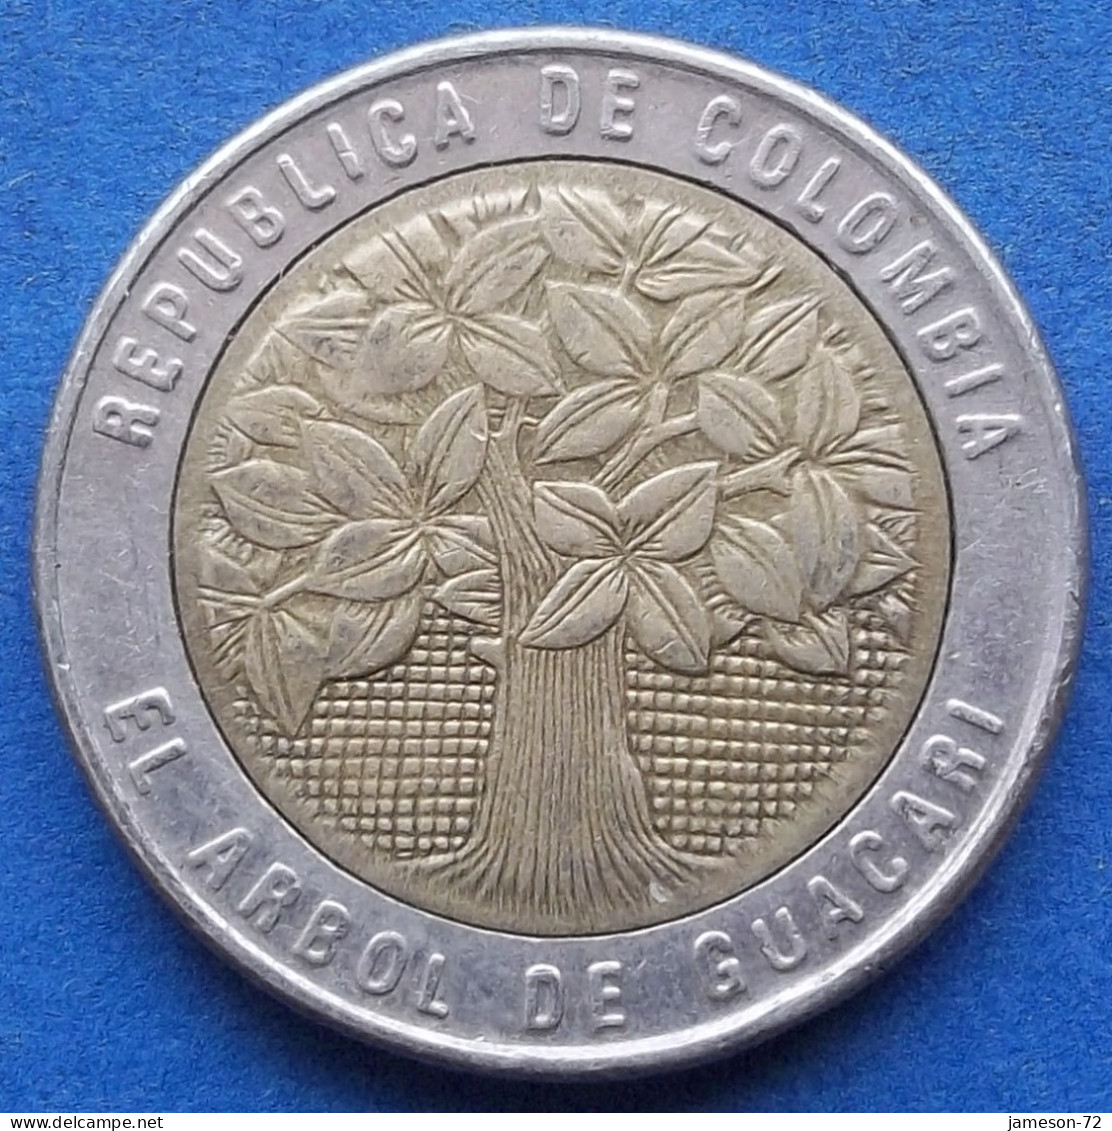 COLOMBIA - 500 Pesos 2003 "Guacari Tree" KM# 286 Republic - Edelweiss Coins - Colombie